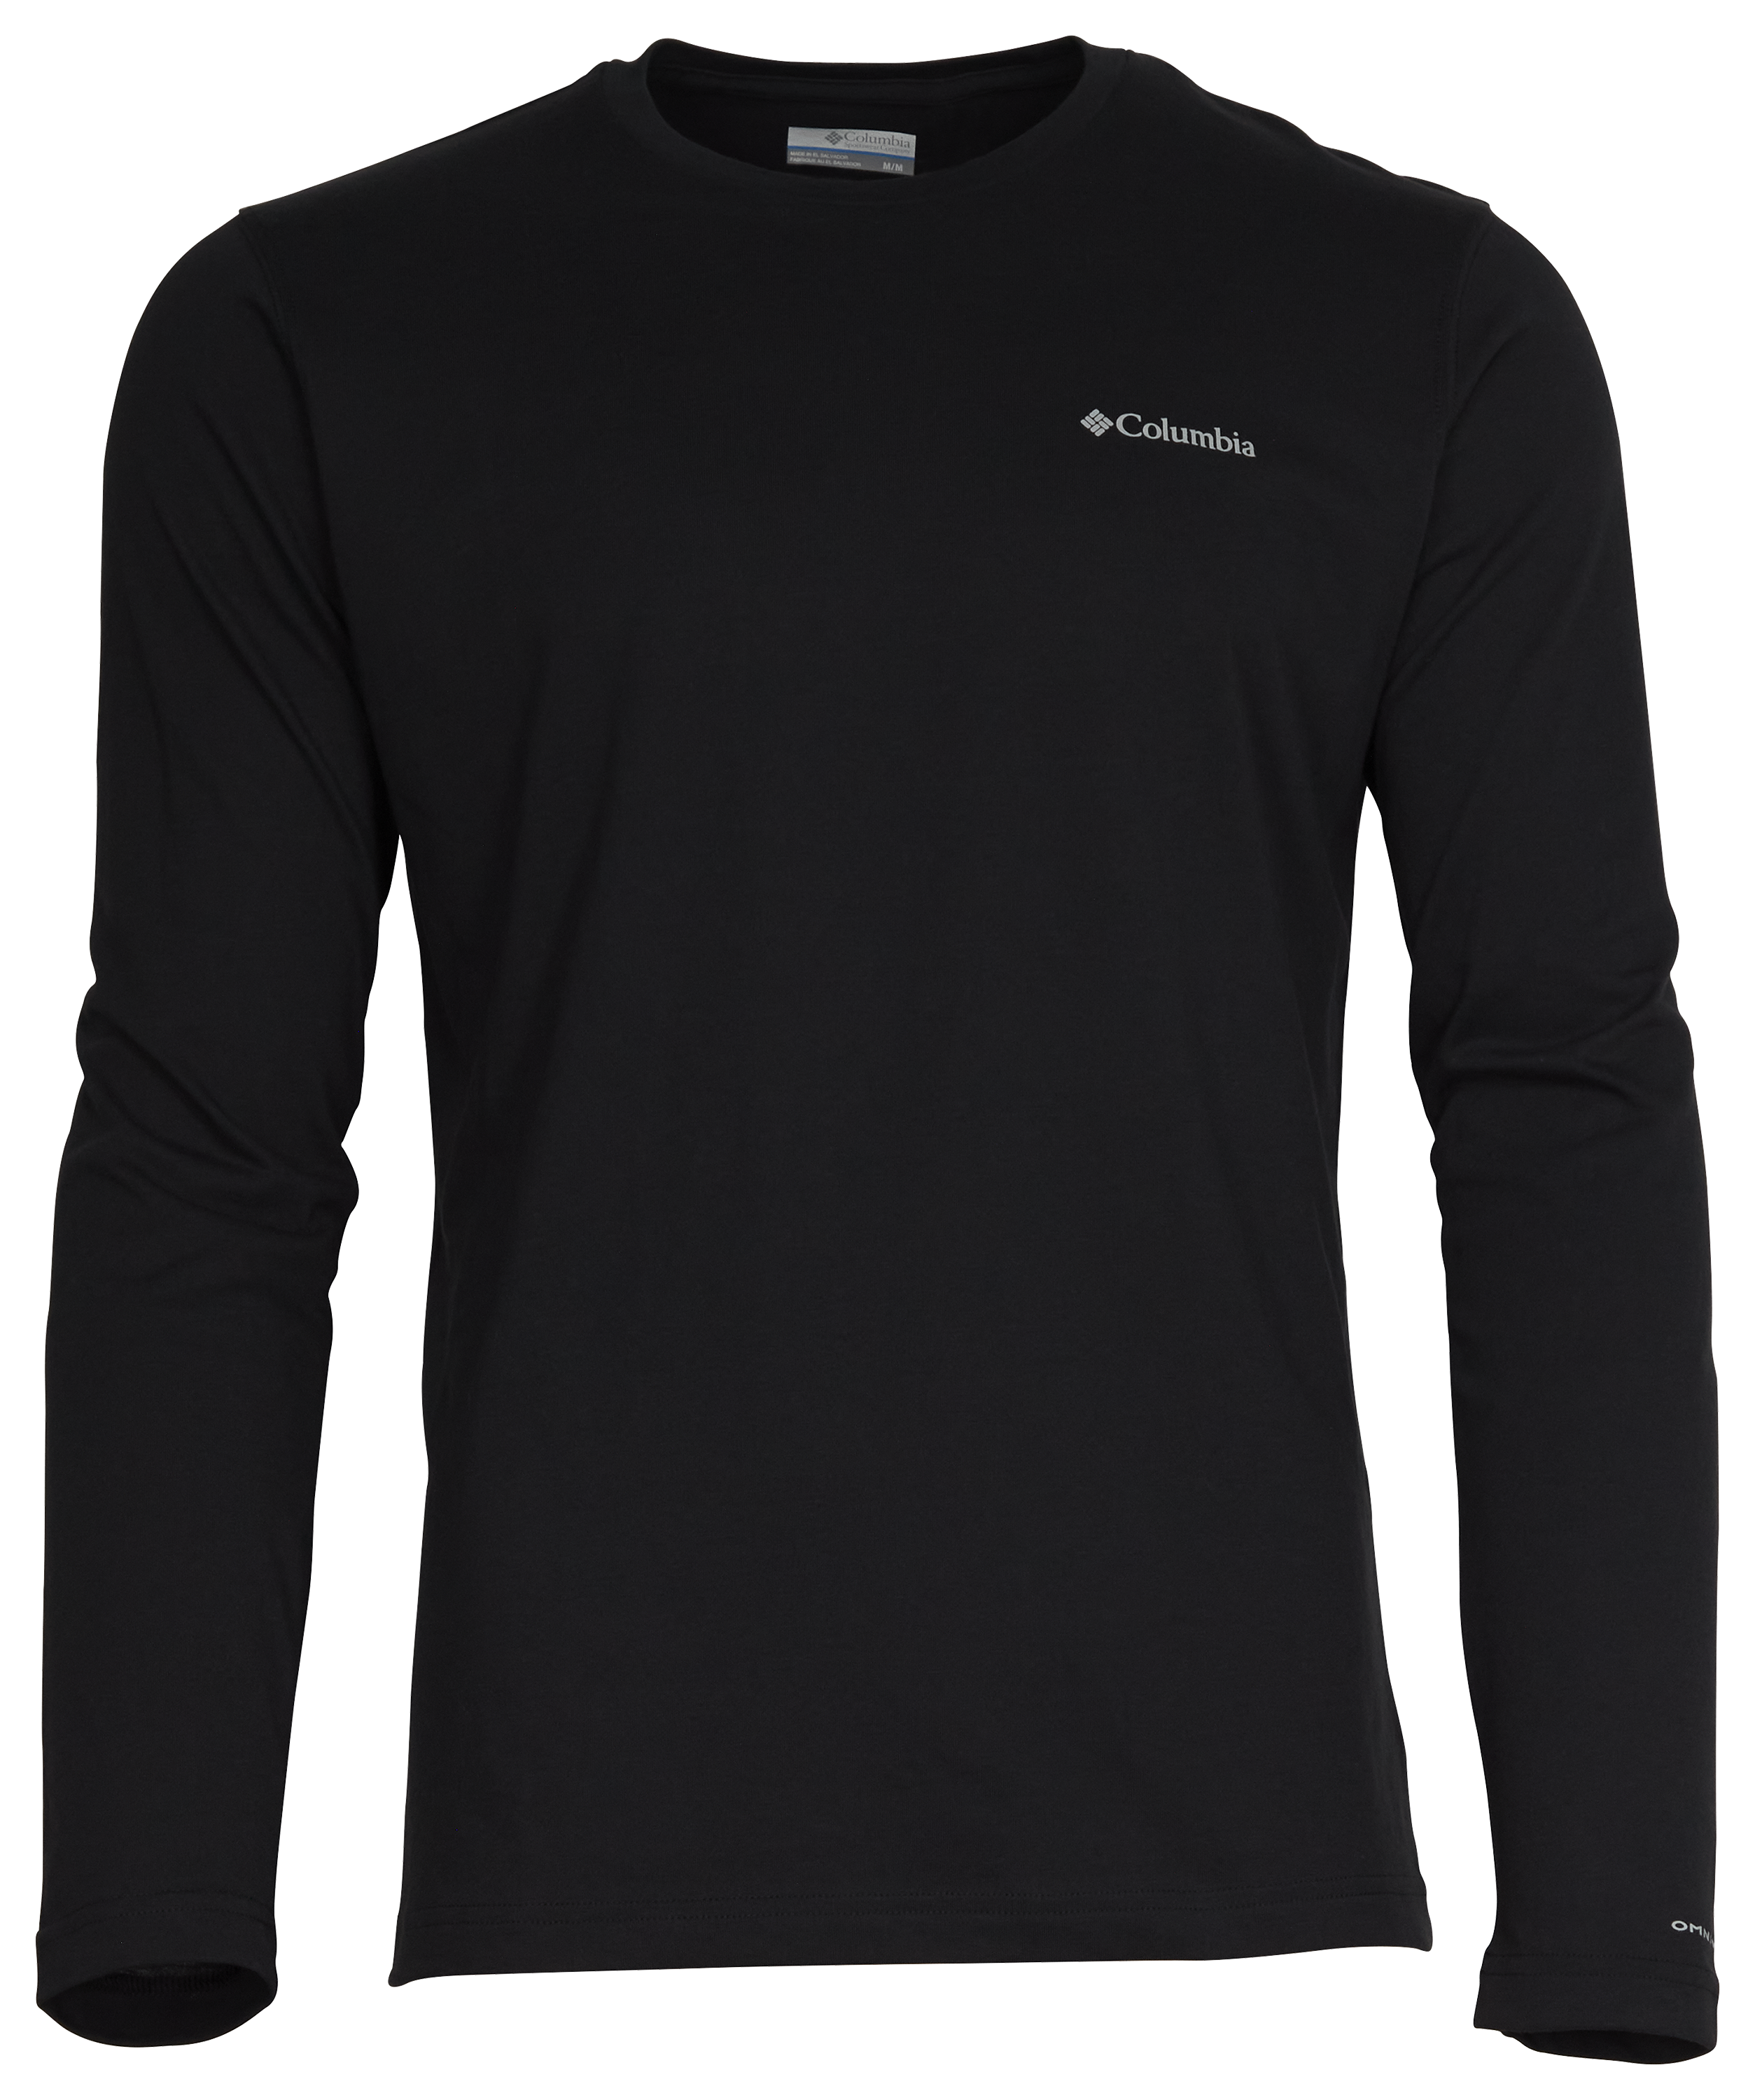 Men's Columbia Long-sleeve t-shirts from £20